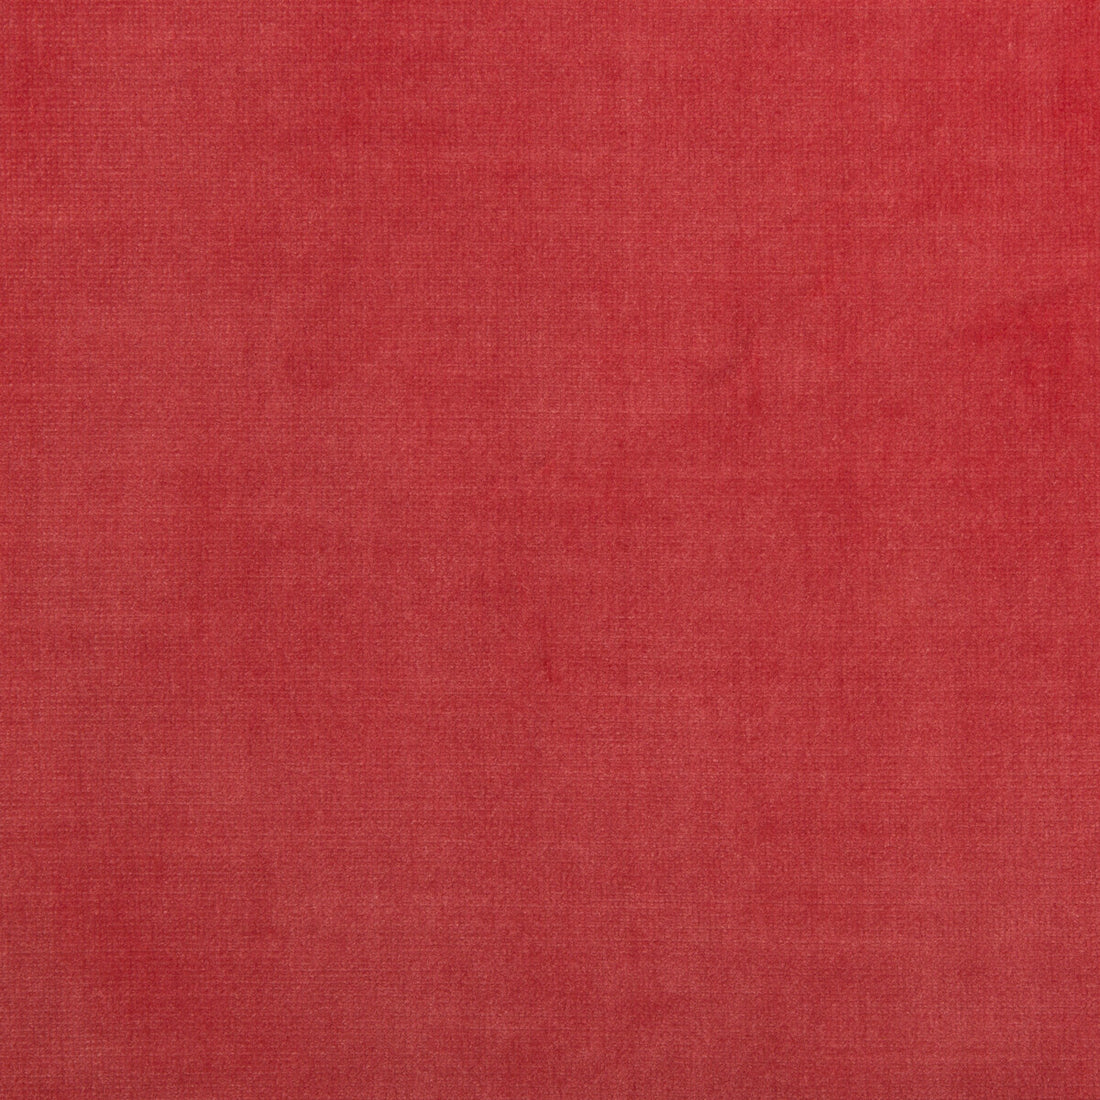 Chessford fabric in berry color - pattern 35360.7.0 - by Kravet Smart in the Performance collection